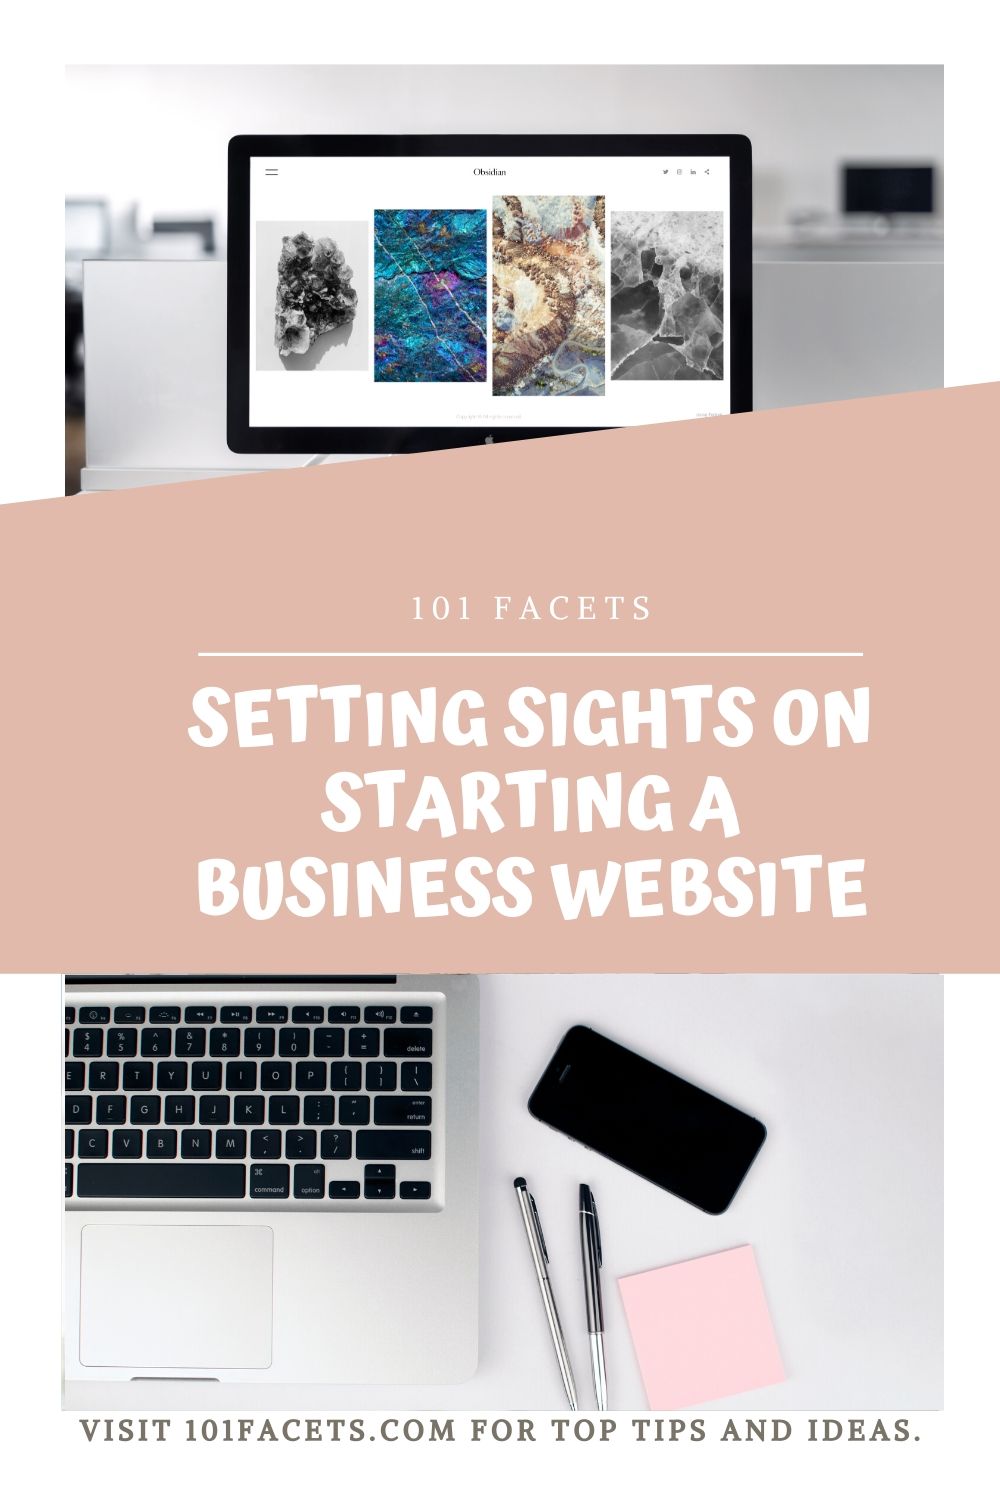 Setting Sights on Starting a Business Website